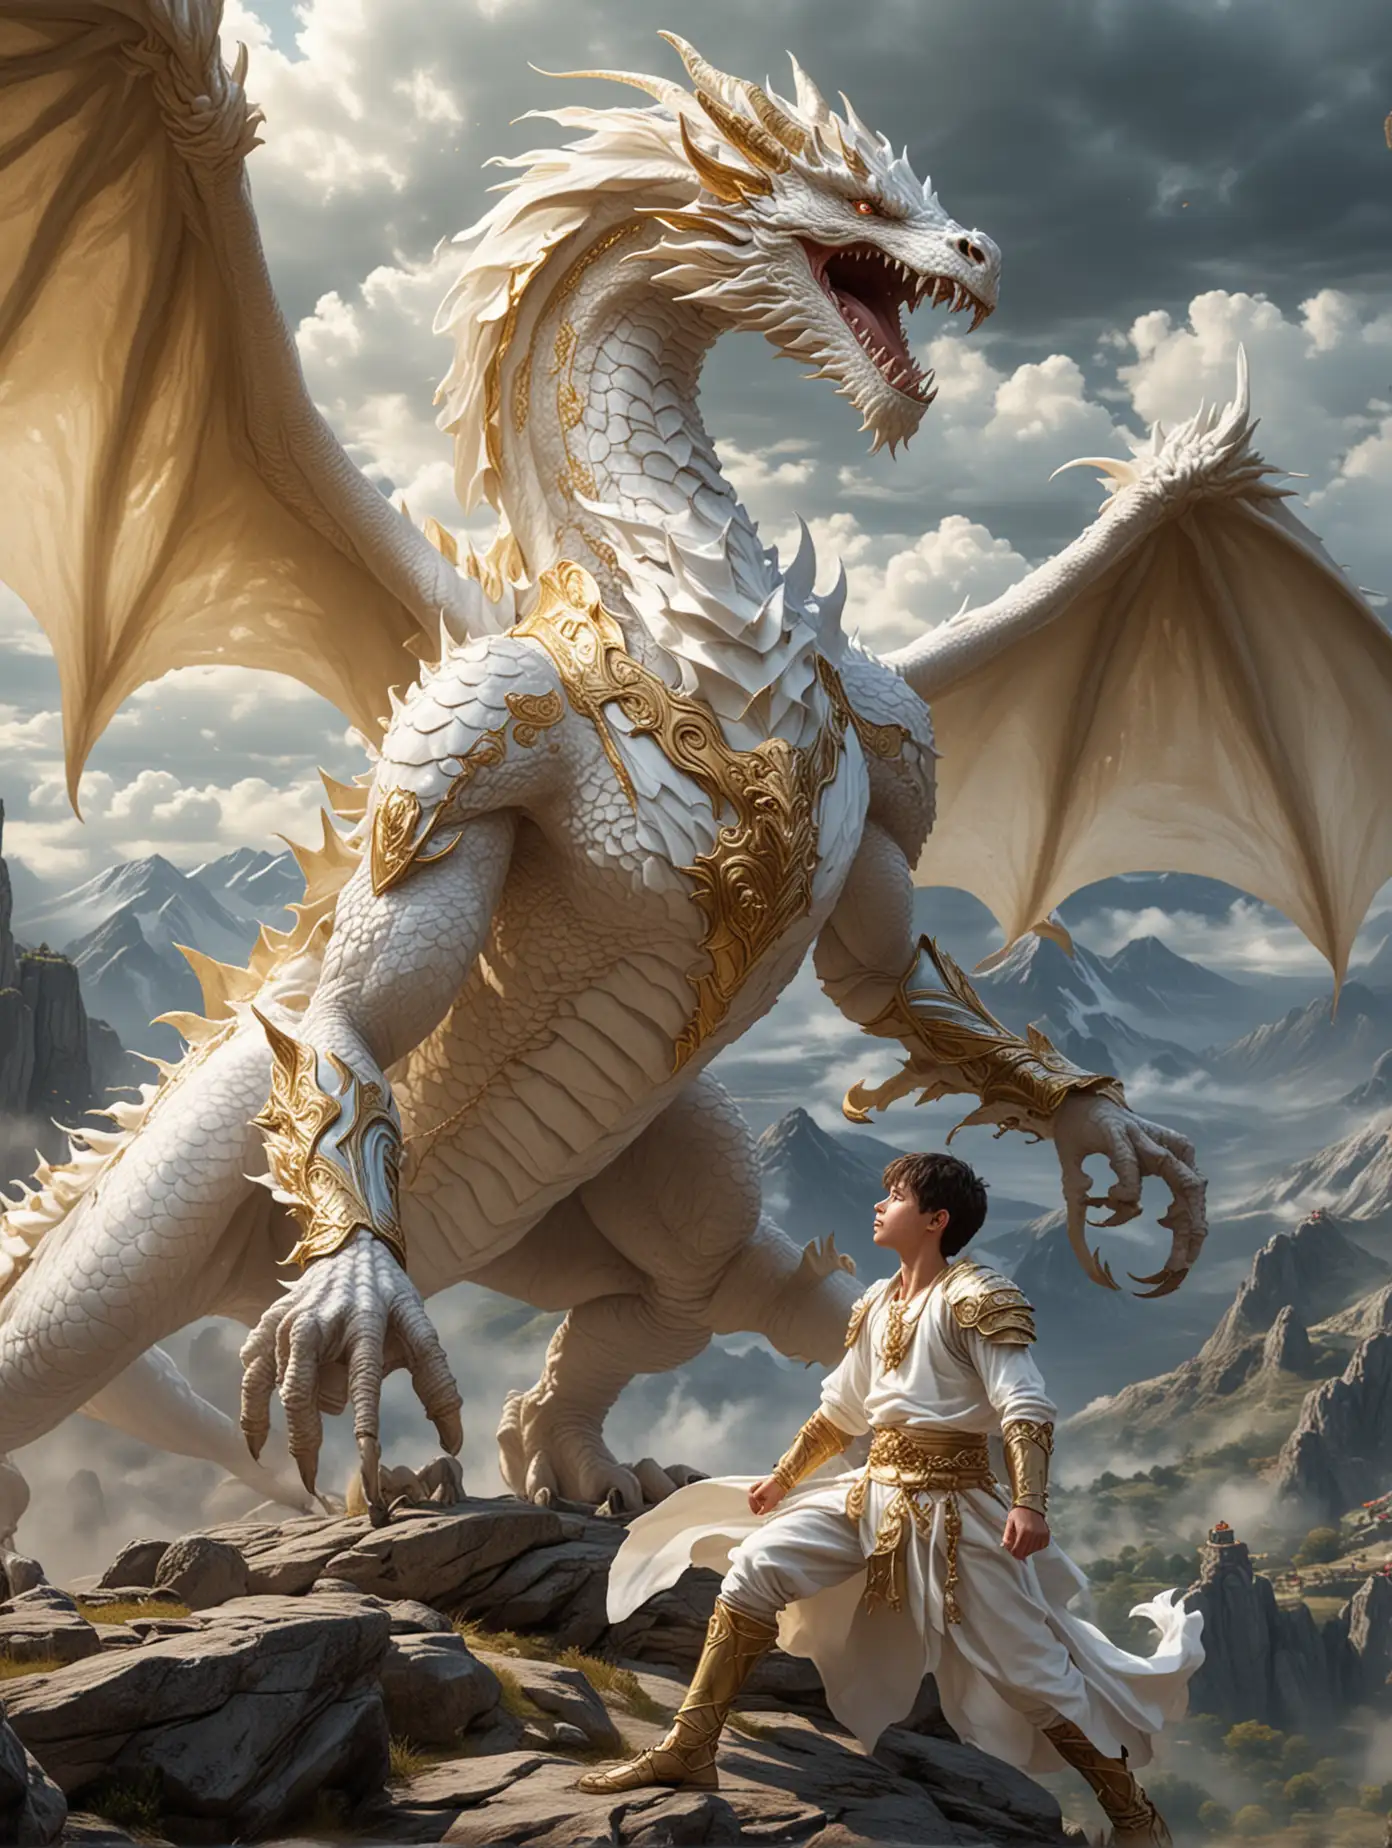 Heroic-Battle-Brave-Young-Knight-Confronts-Enormous-Dragon-atop-a-Mountain